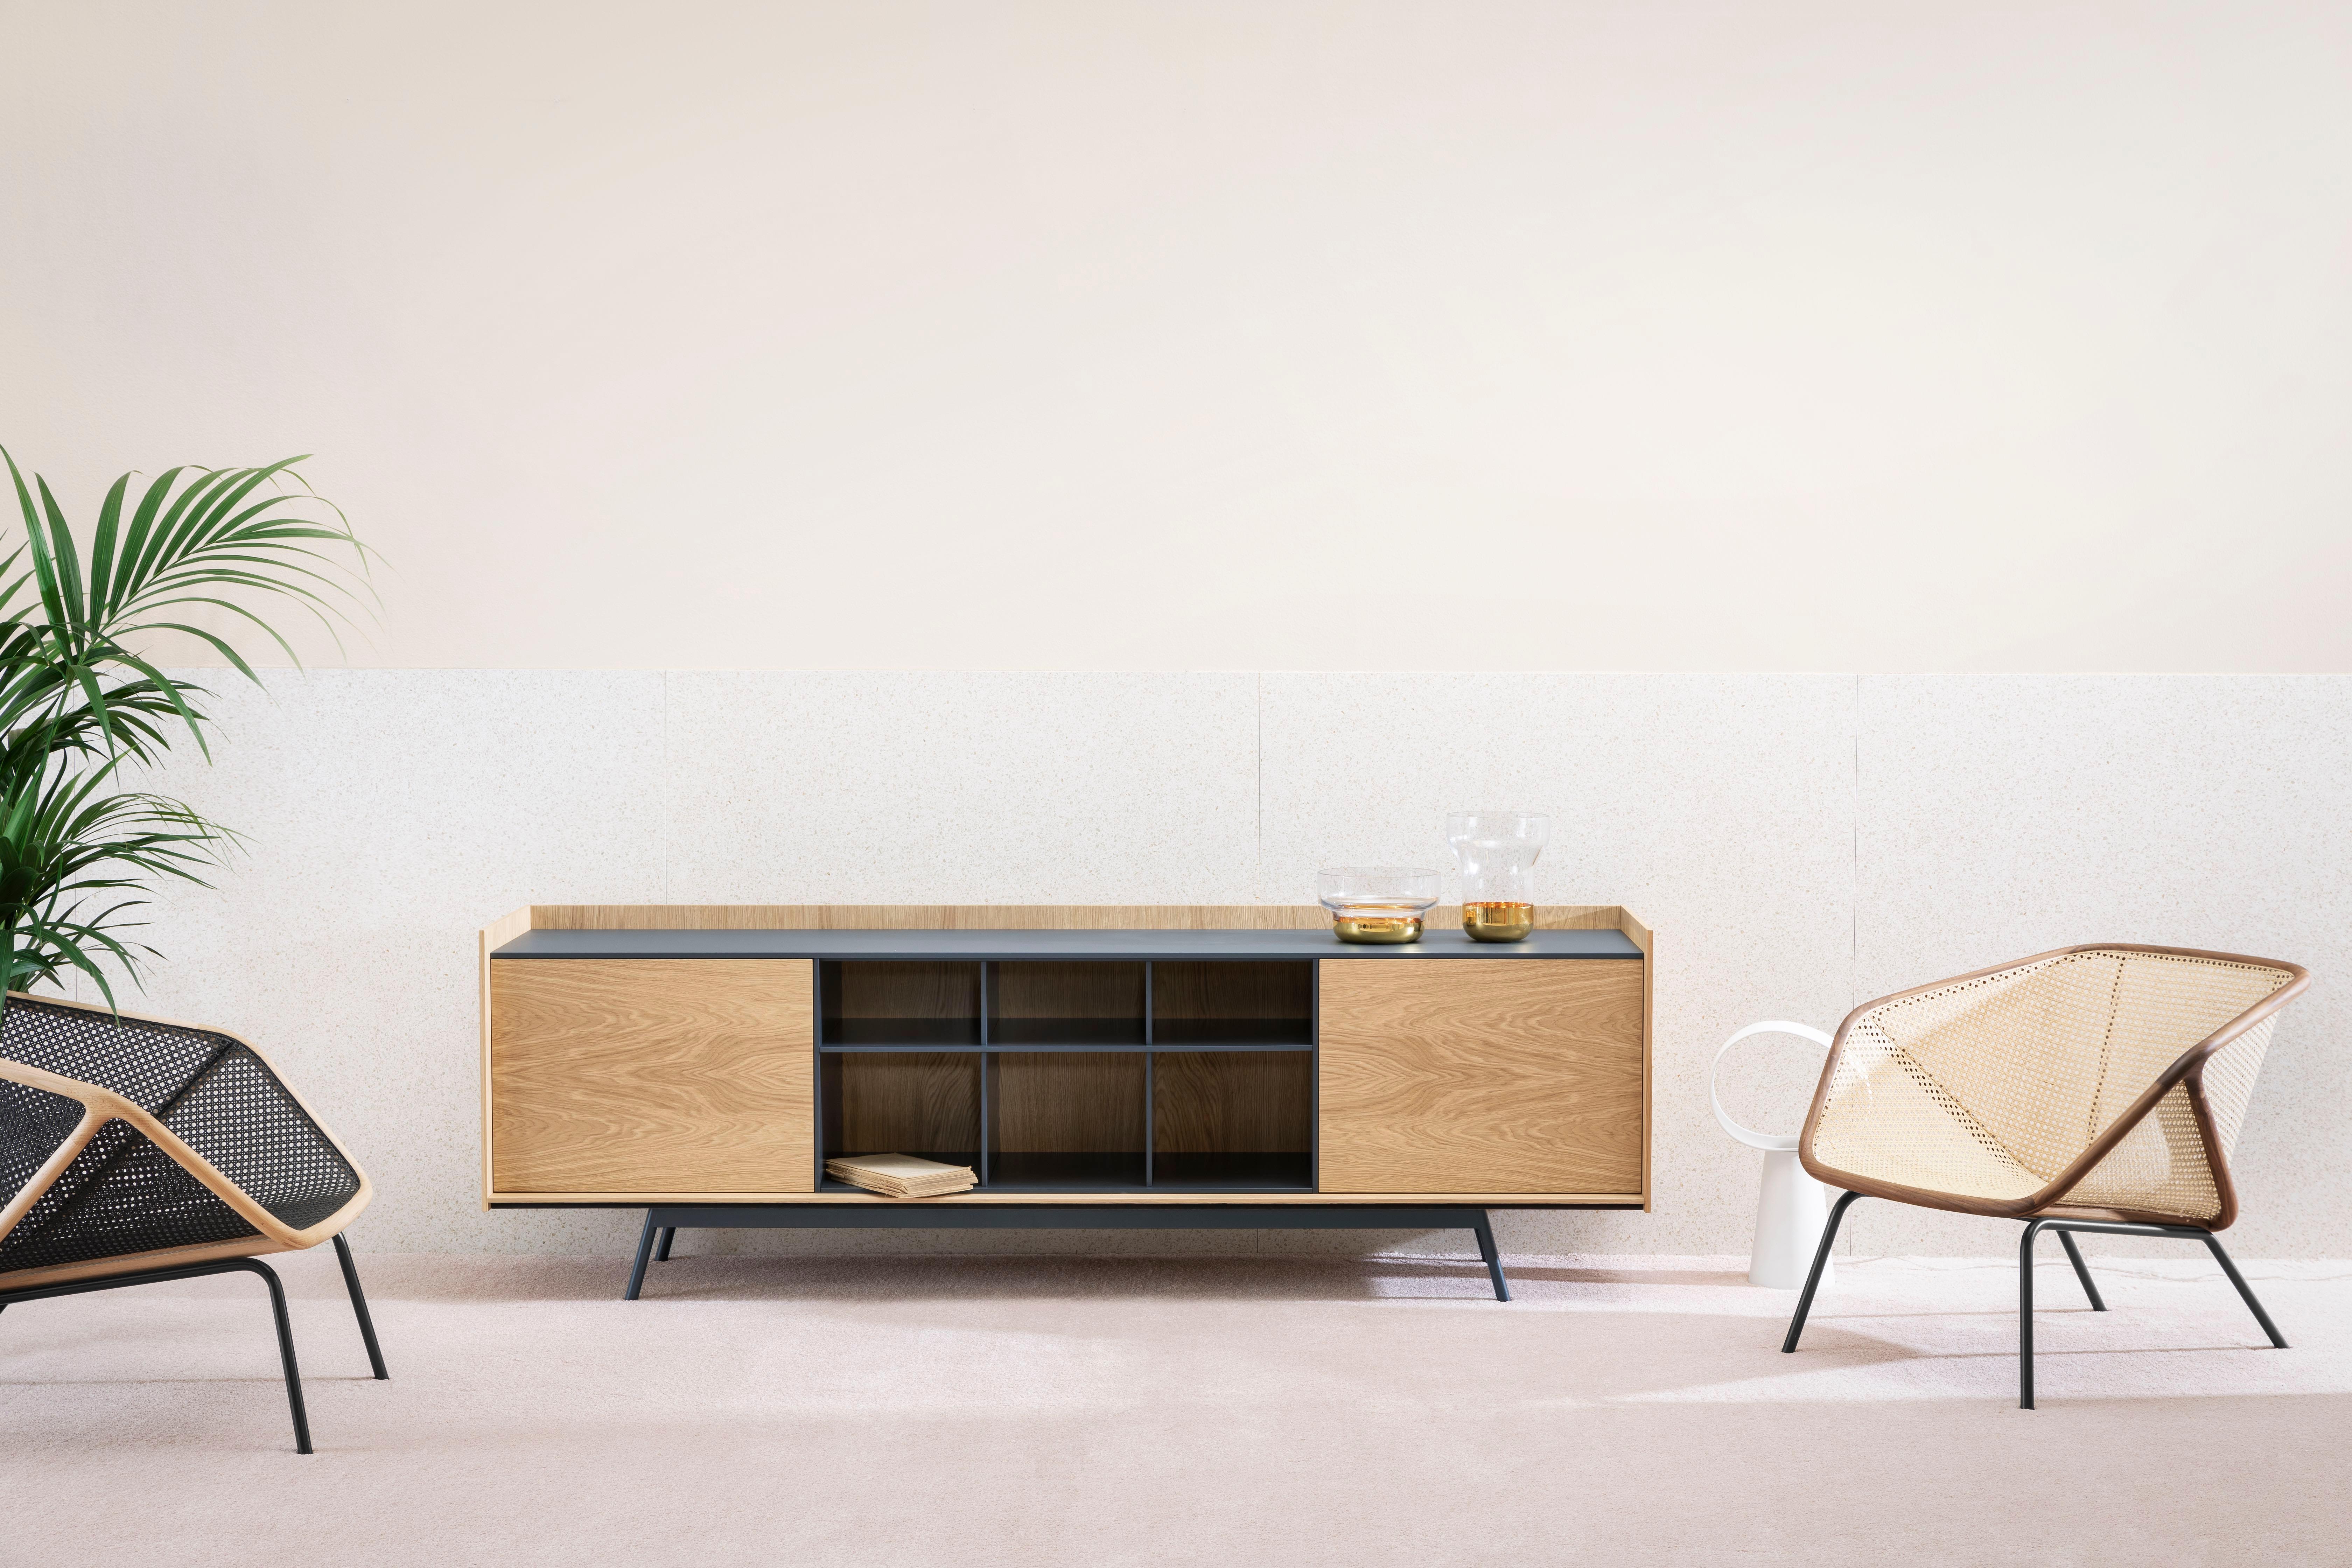 The Edge sideboard is available in various dimensions, doors and structures. Structure options include flamed oak, heat-treated oak or Canaletto walnut. Top and open compartment are in wooden finish, lacquered in white, black, silk grey, dusty grey